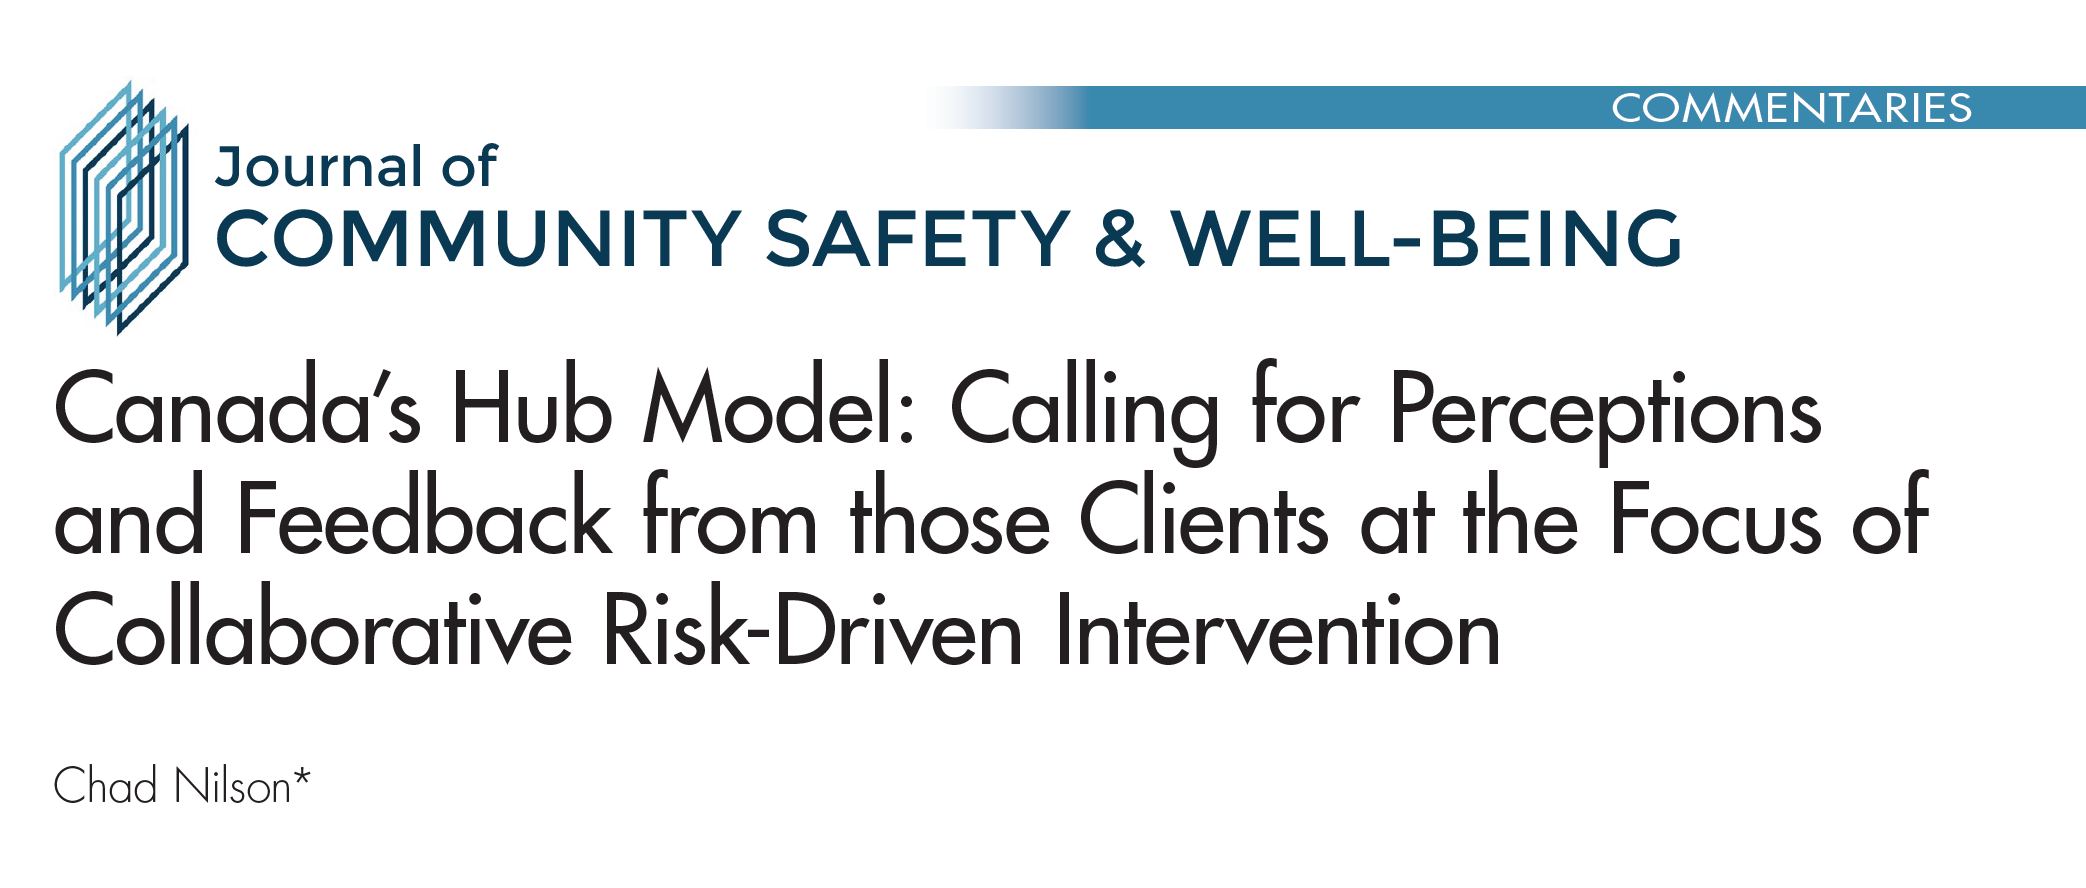 Canada's Hub Model: Calling for Perceptions and Feedback from those Clients at the Focus of Collaborative Risk-Driven Intervention. Written by Chad Nilson